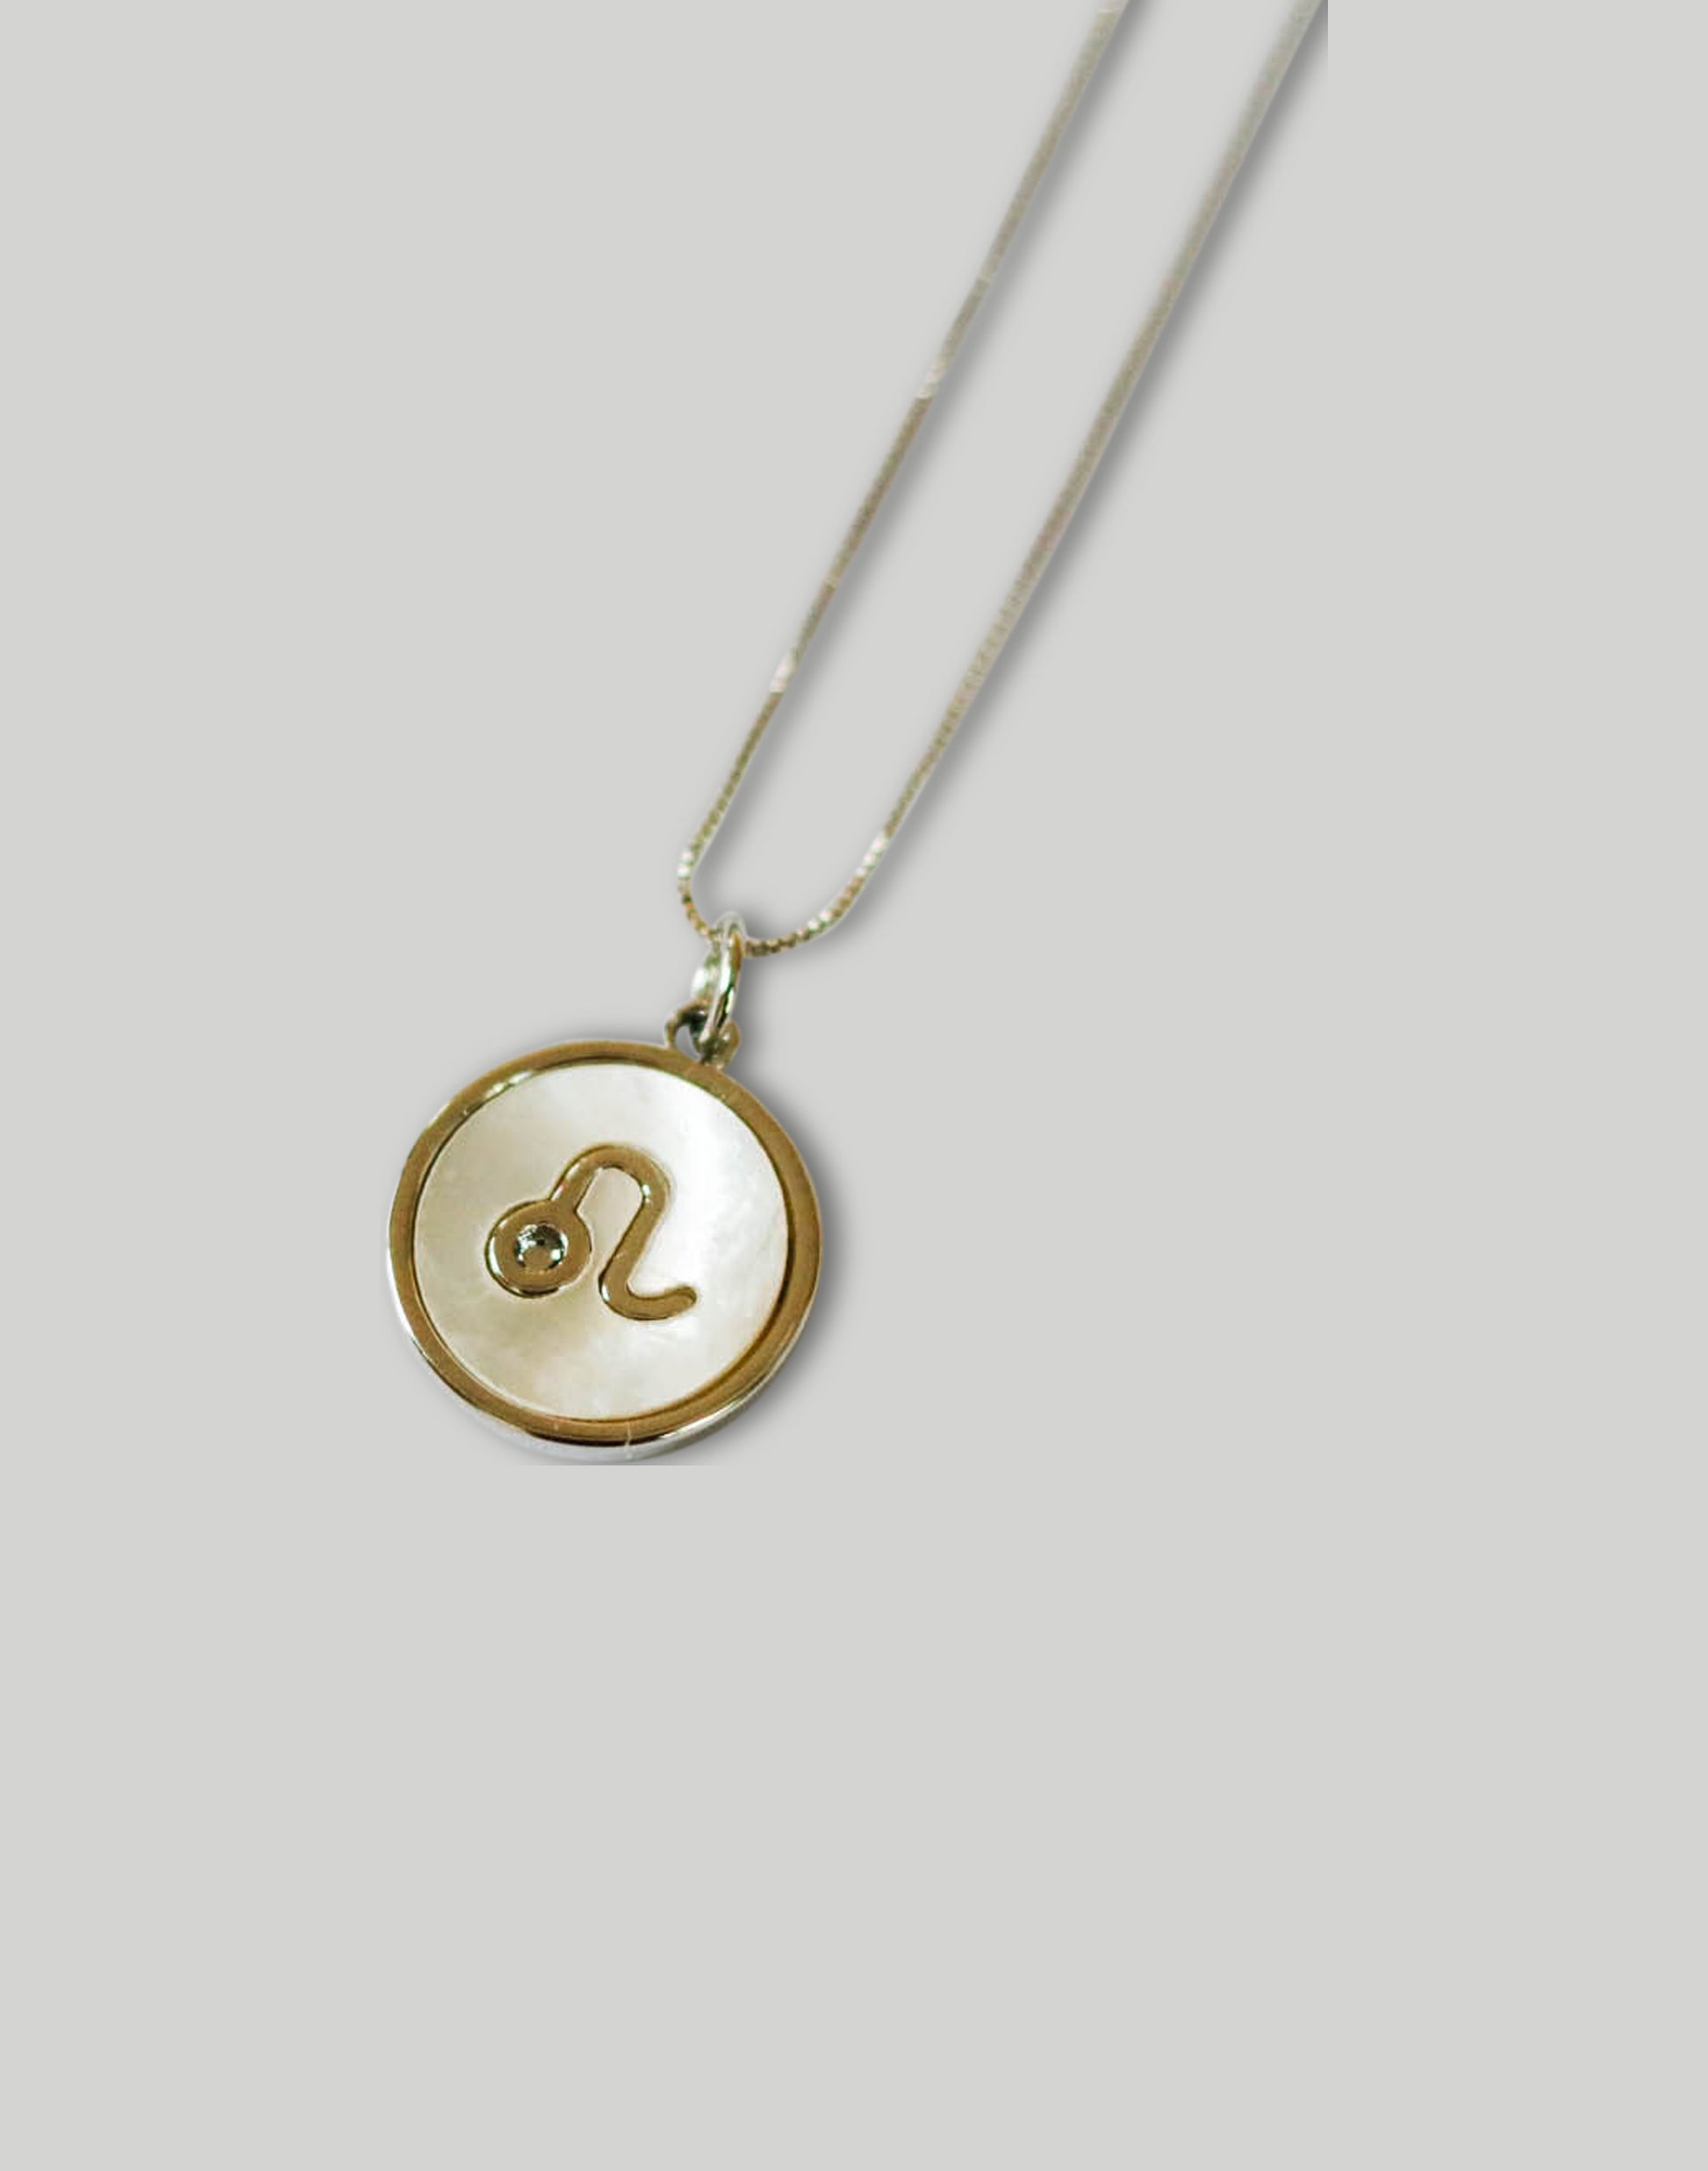 Silver Pisces Necklace - A Simple and Elegant Way to Show Your Zodiac Sign